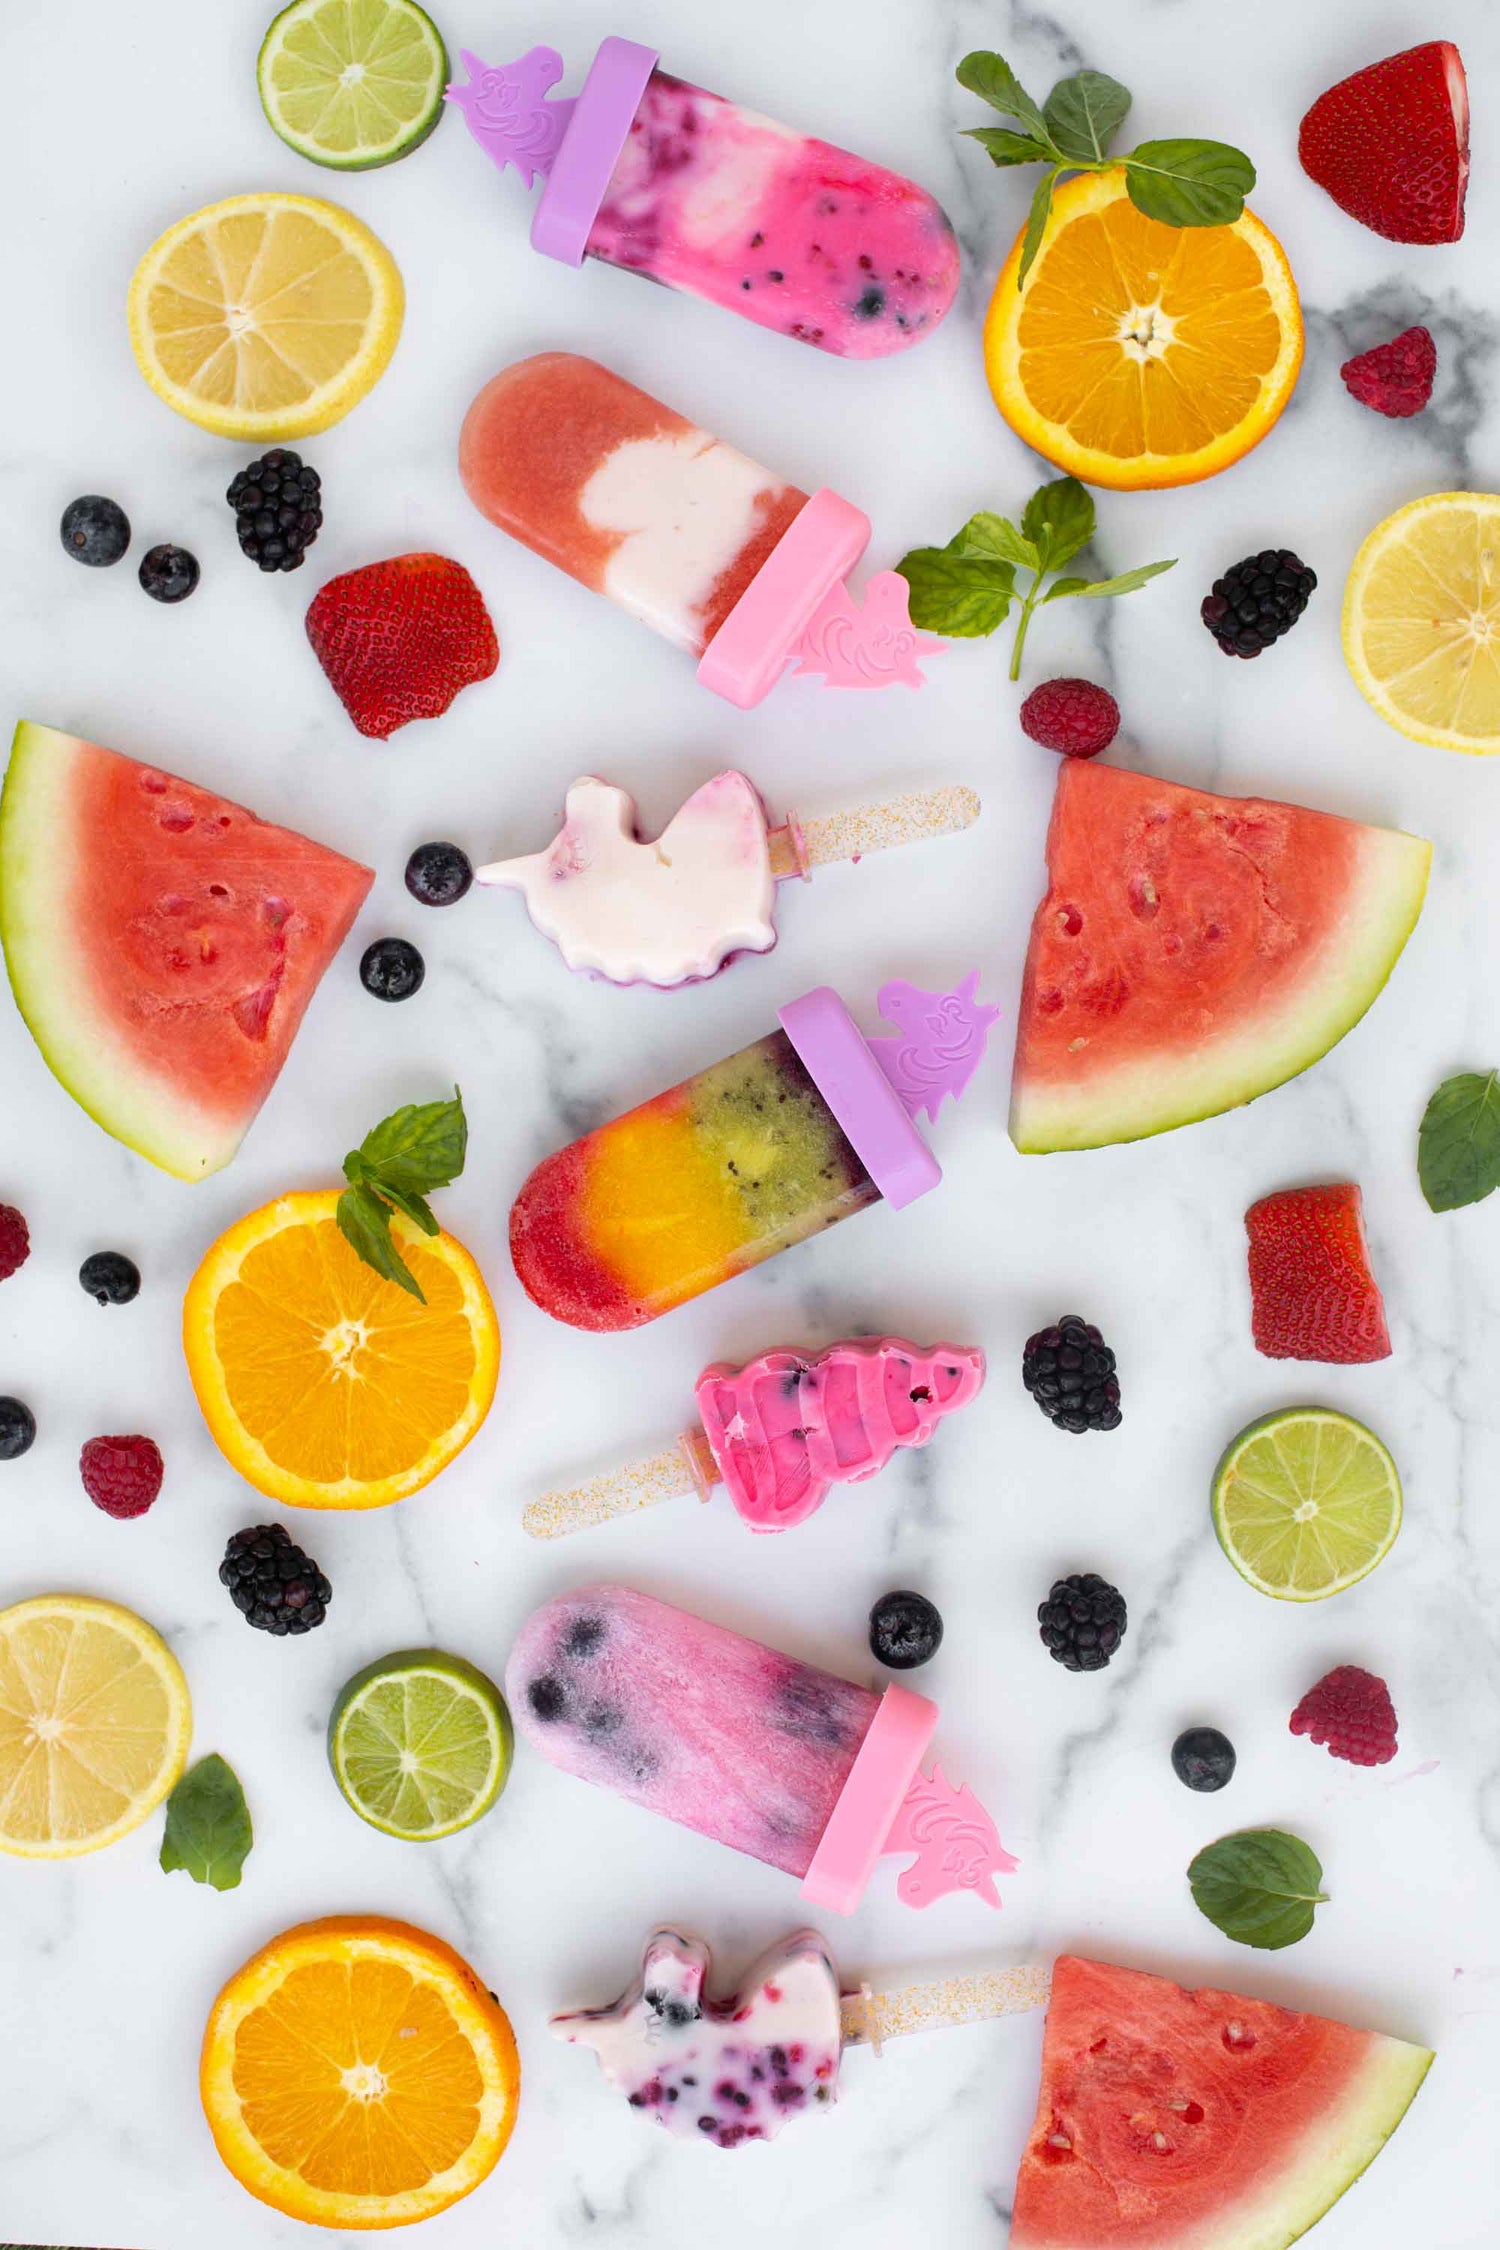 Lifestyle image of rainbow and unicorns ice pops surrounded by various fruits.  Edit alt text